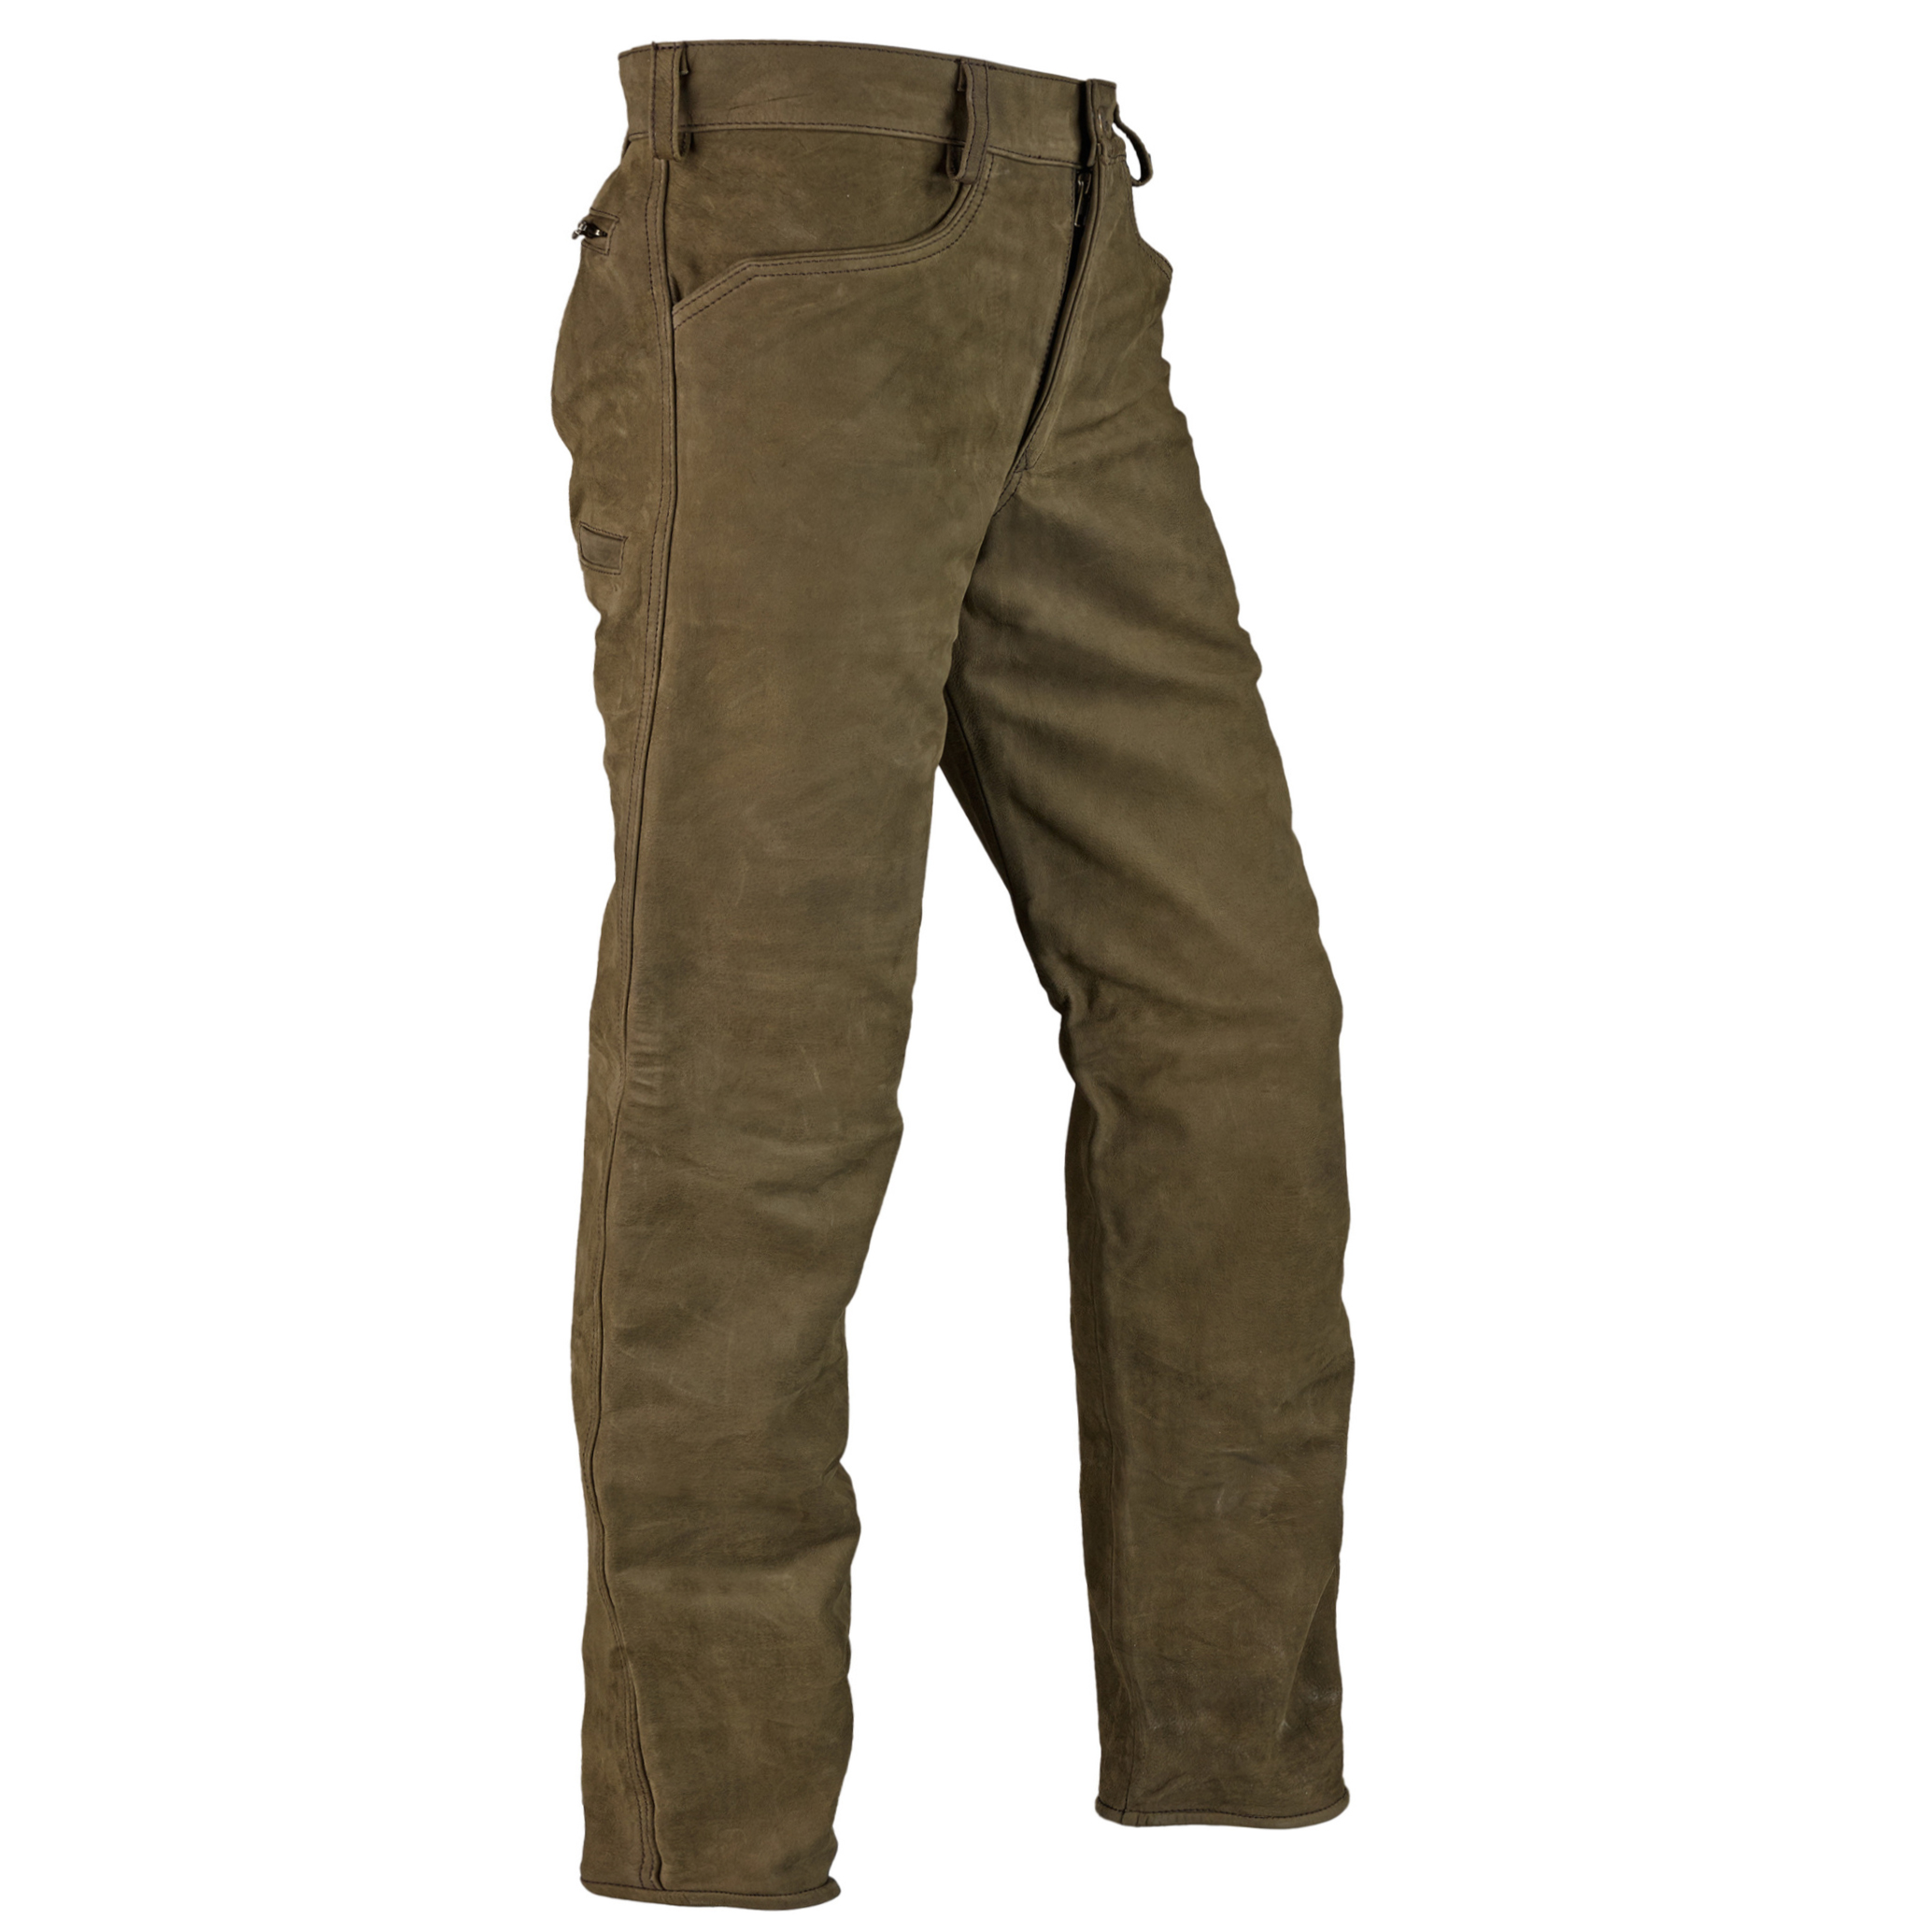 Mens Waterproof And Tear-resistant Chic Hunting Leather Pants